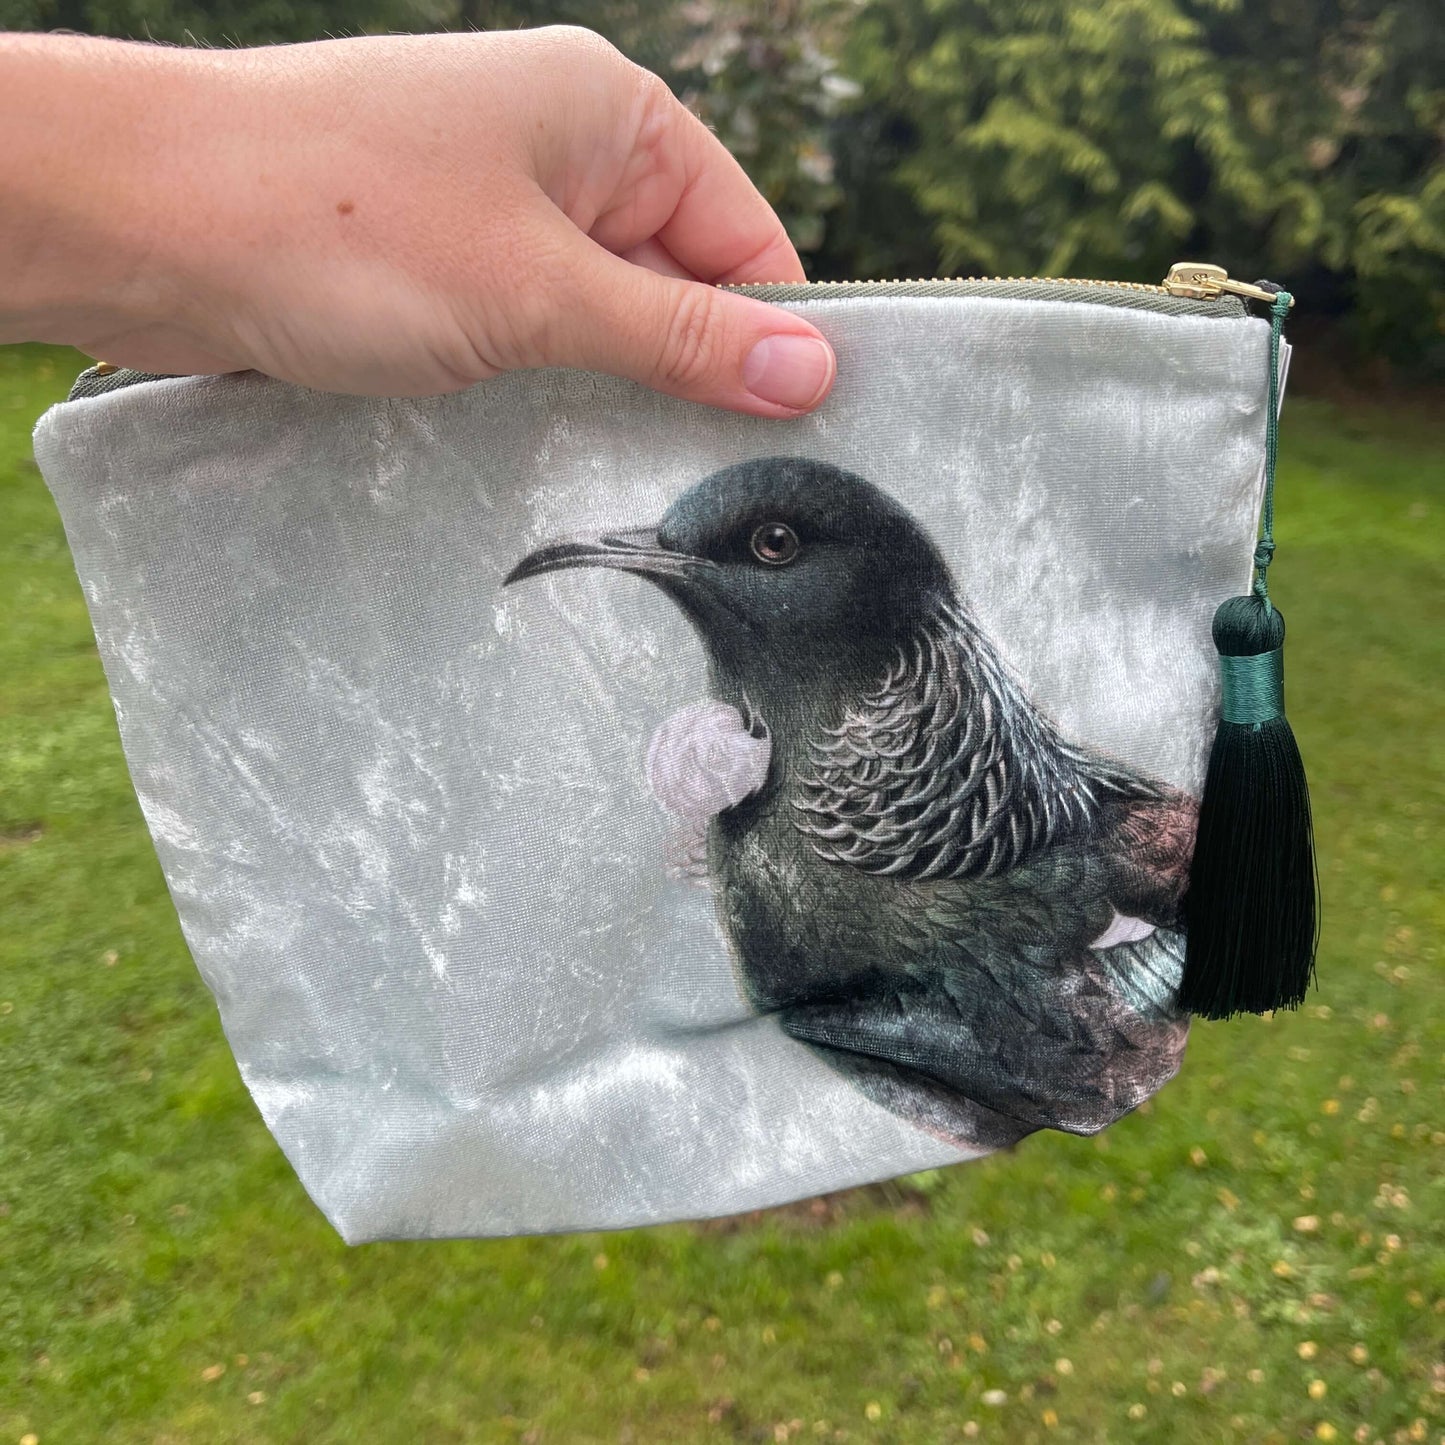 Velvet cosmetic bag featuring the head of a Tui bird being held by a persons hand.